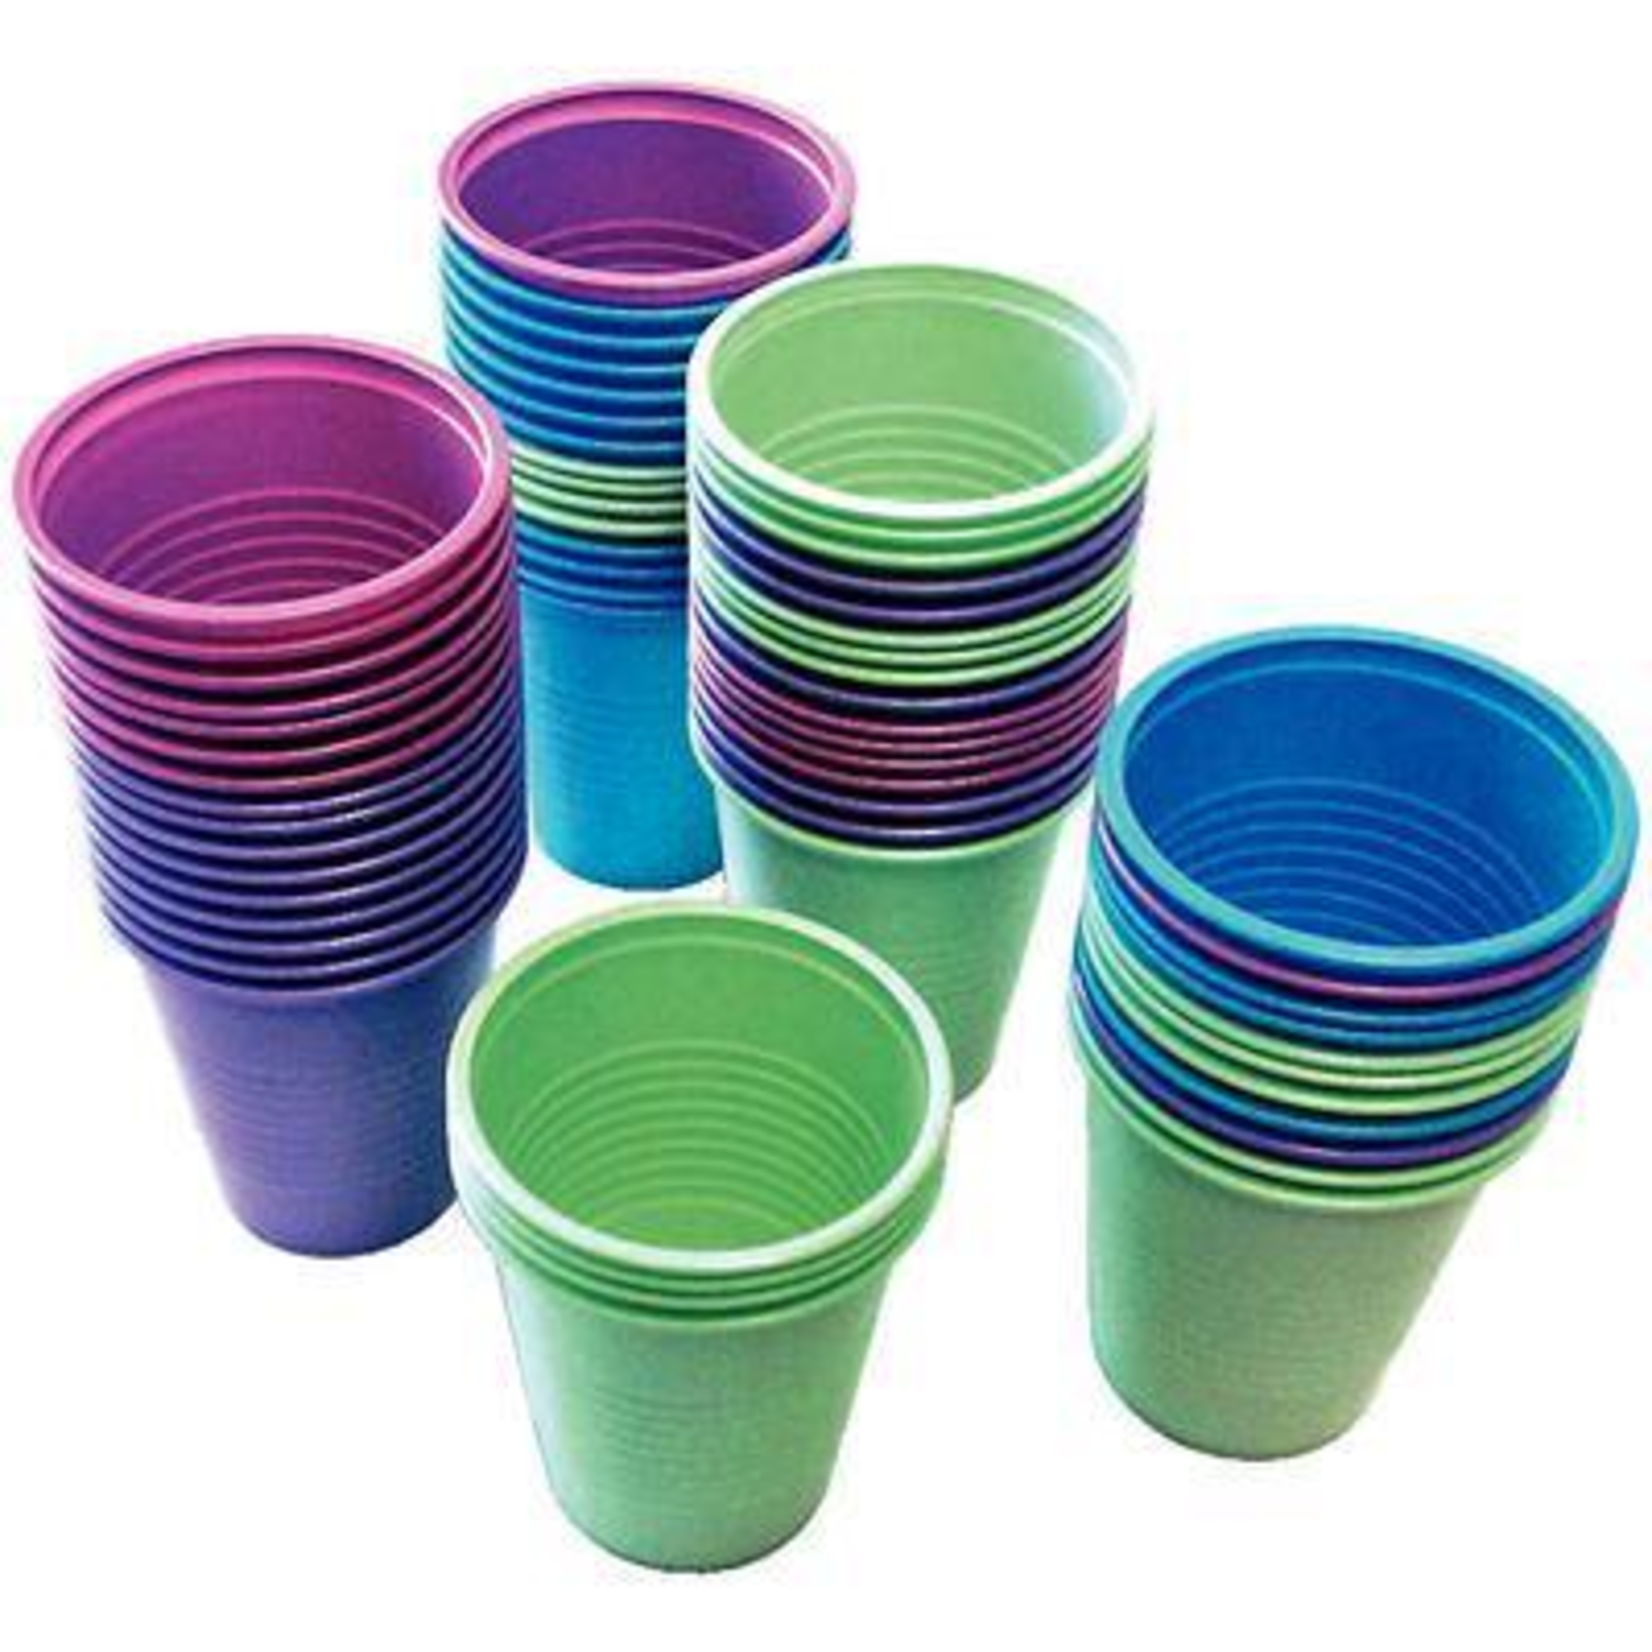 DISPOSABLE RINSE CUPS - PACKAGE OF 100